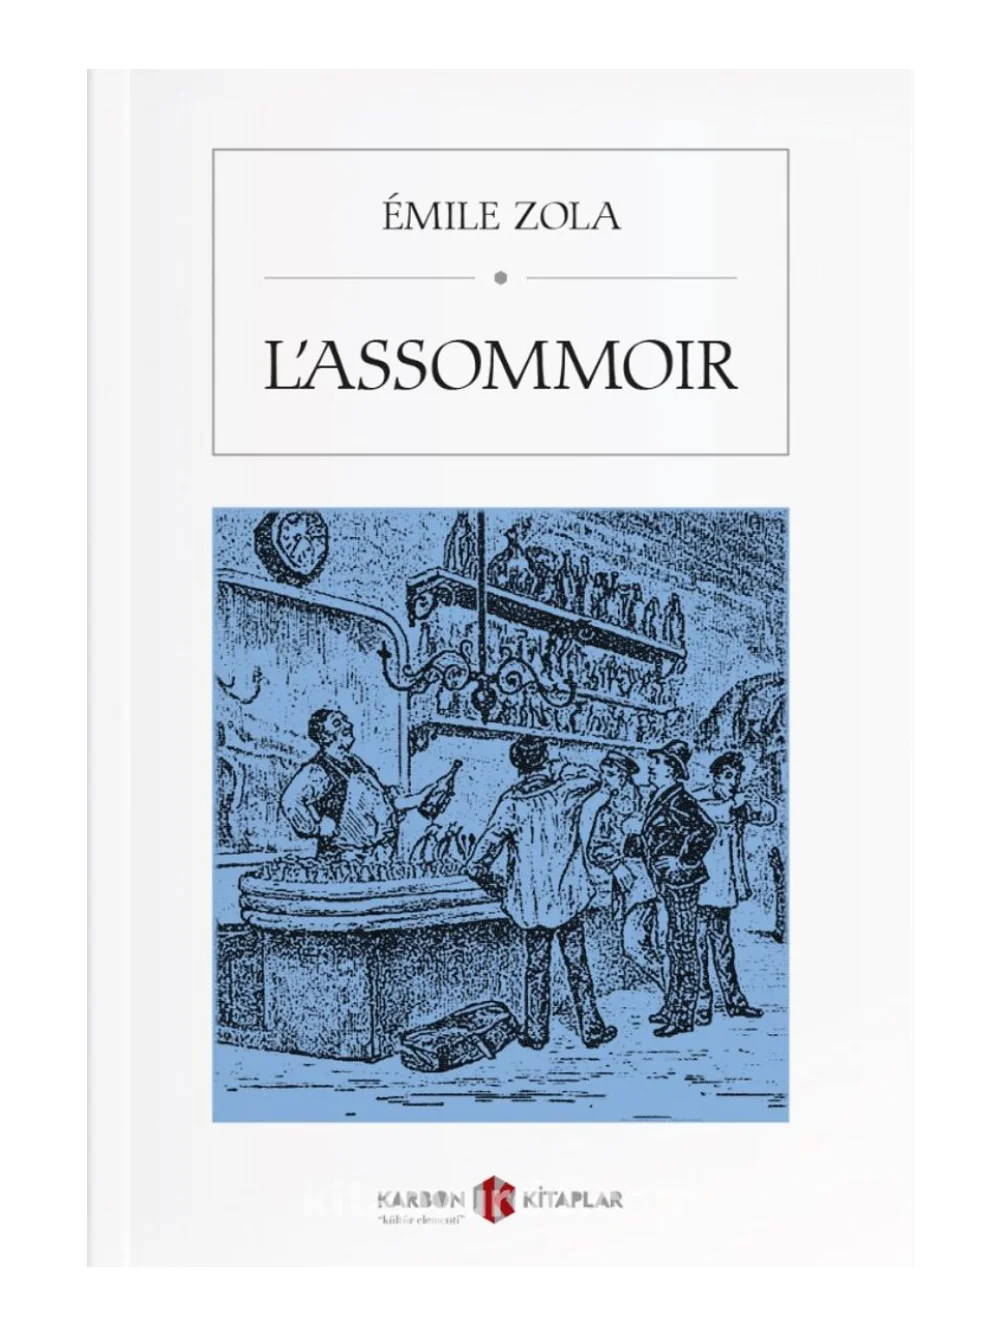 

L'Assommoir - Emile Zola - French book - The best classics of world literature - Nice gift for friends and French Learners